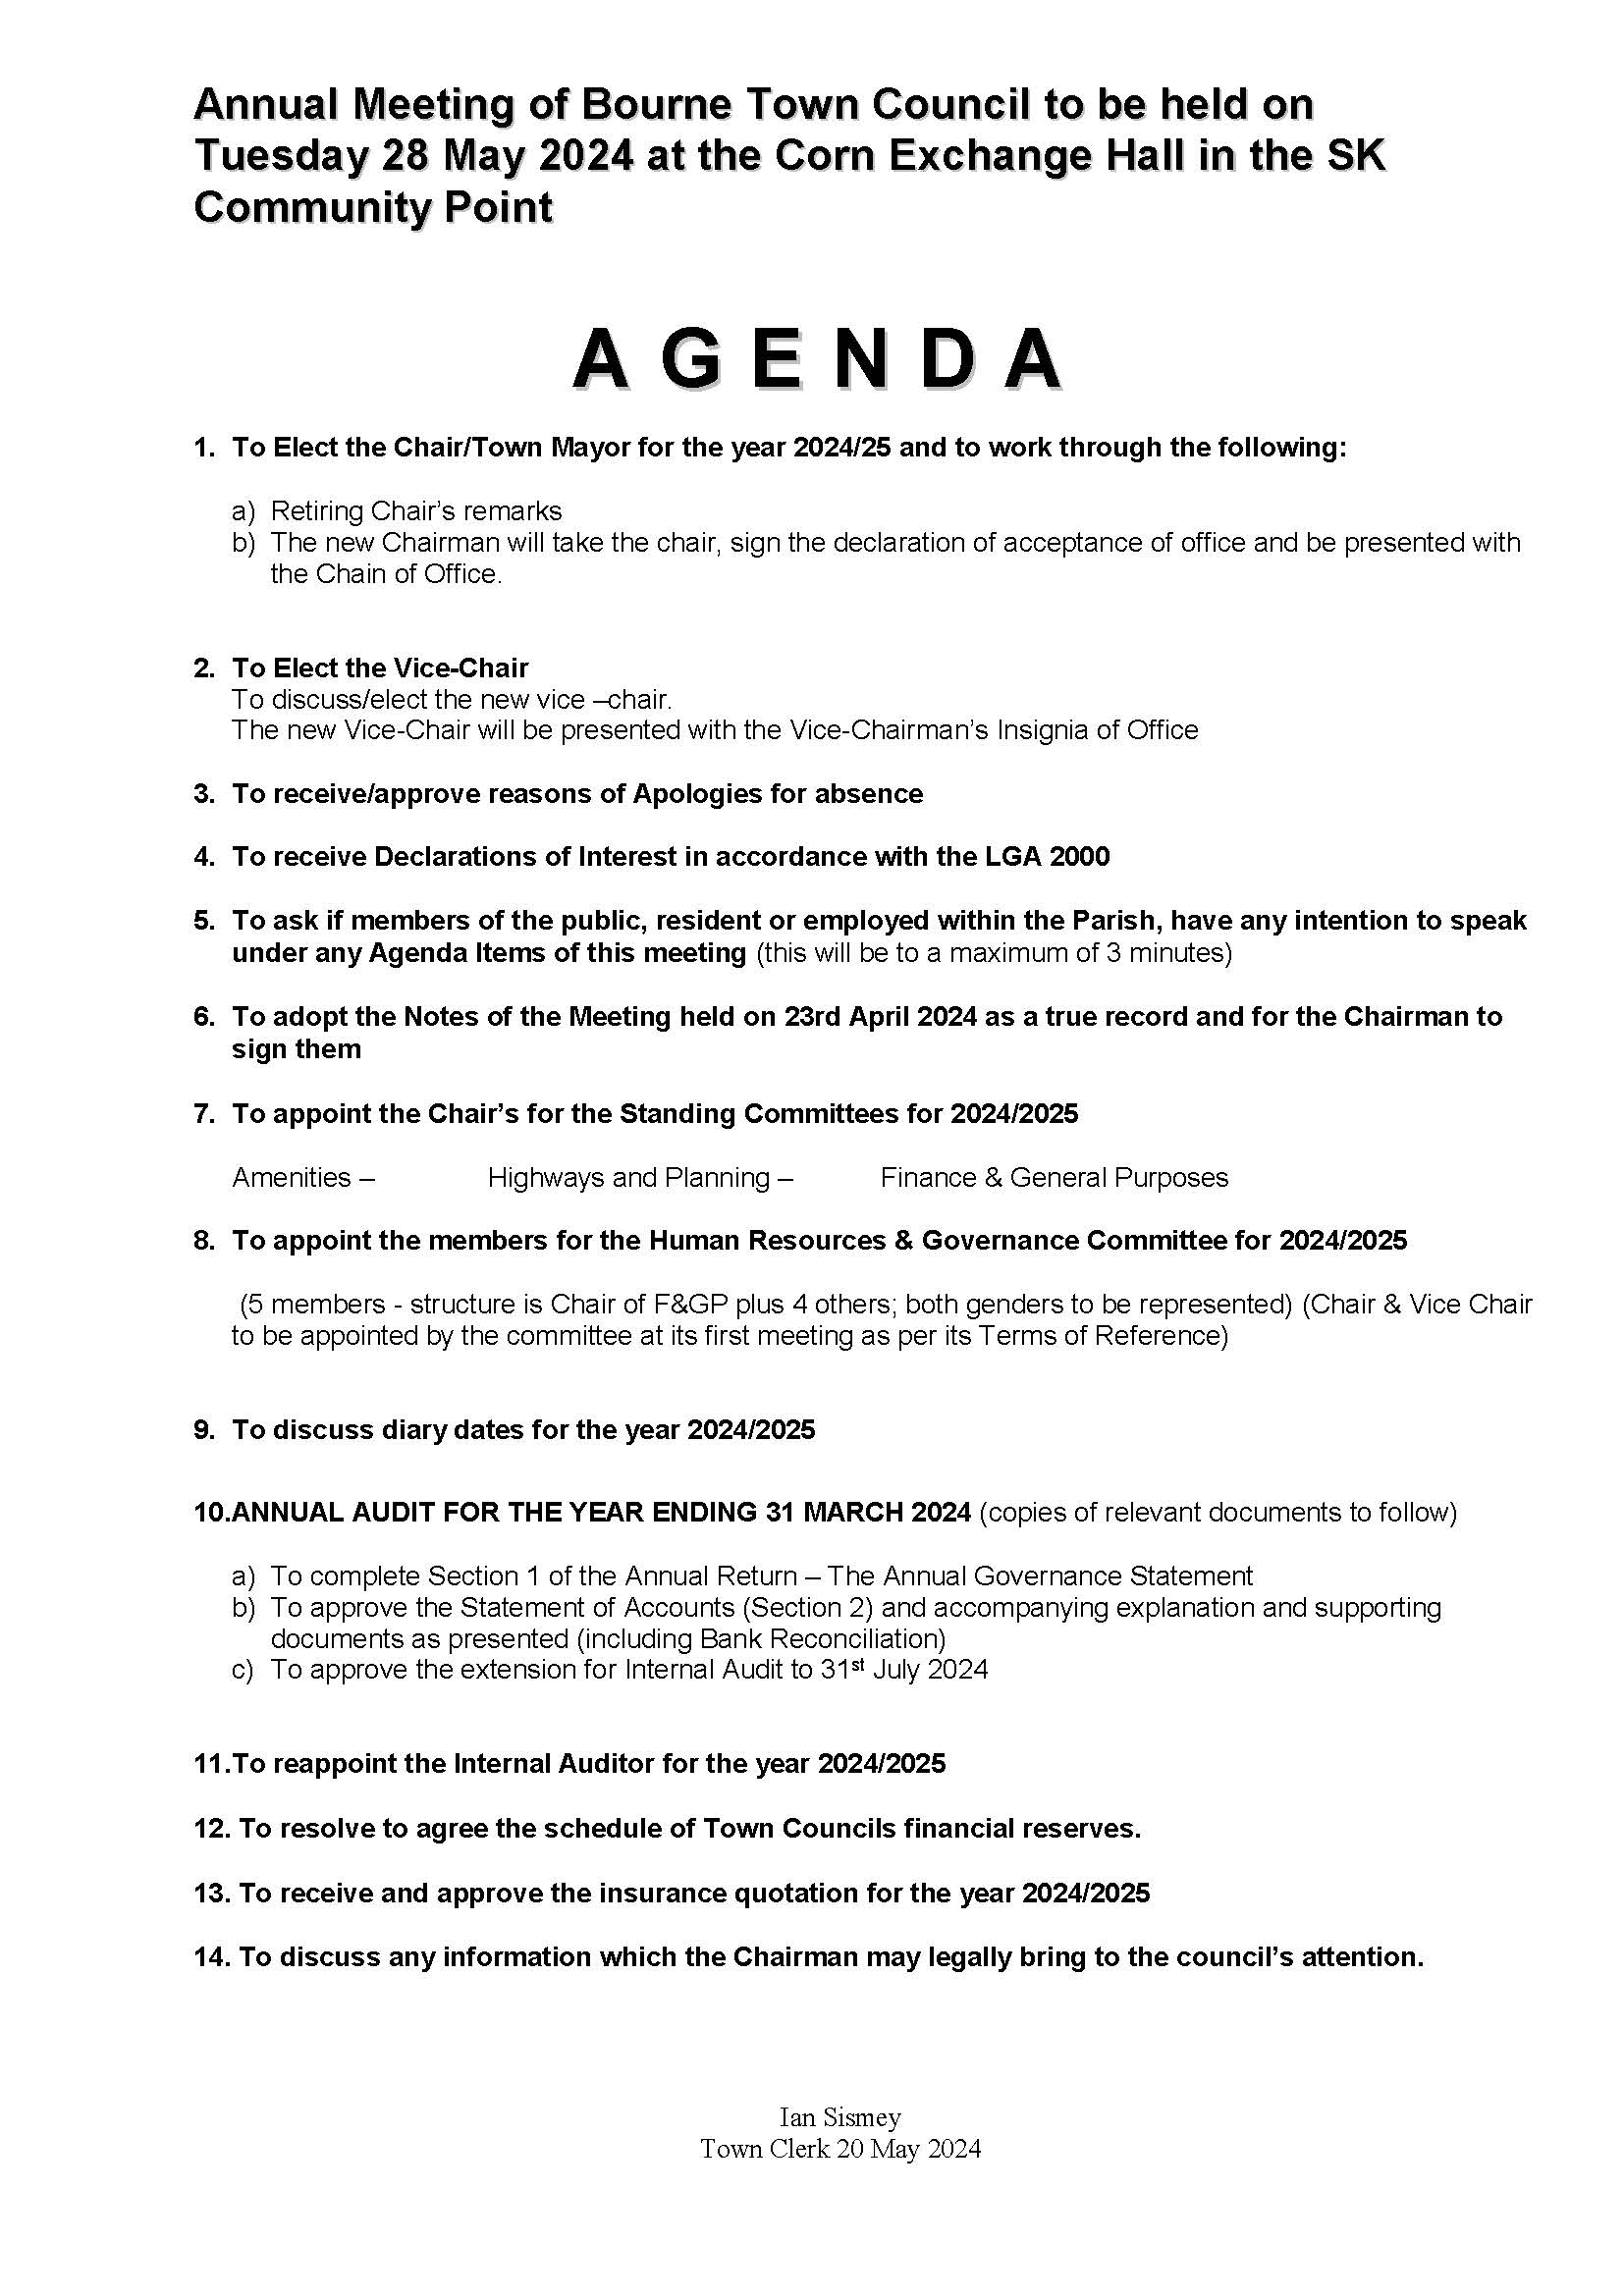 Agenda and notice for annual meeting page 2